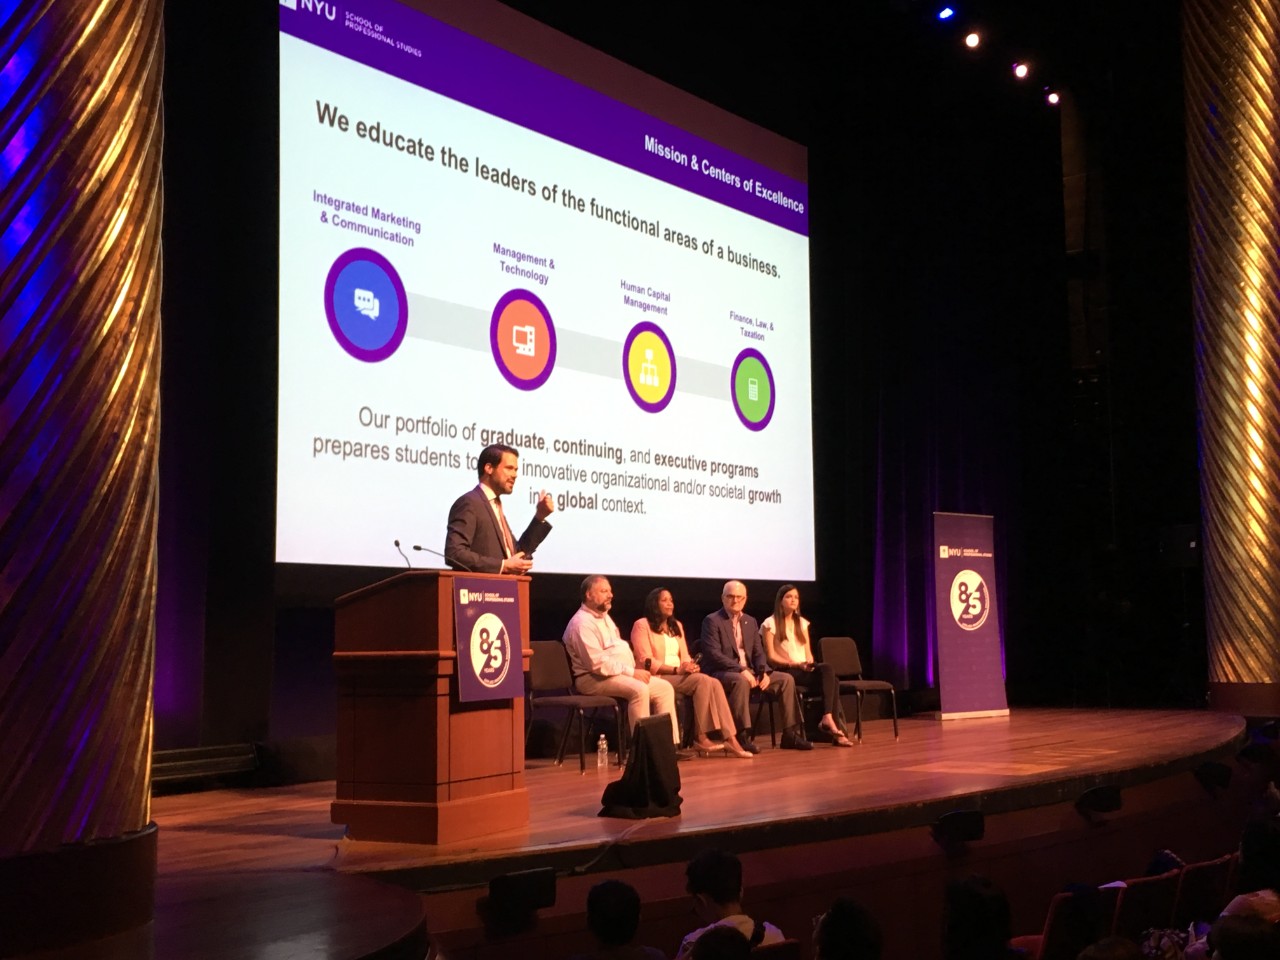 Dean Ihrig speaking at the NYUSPS Orientation at Skirball Center for the Performing Arts.